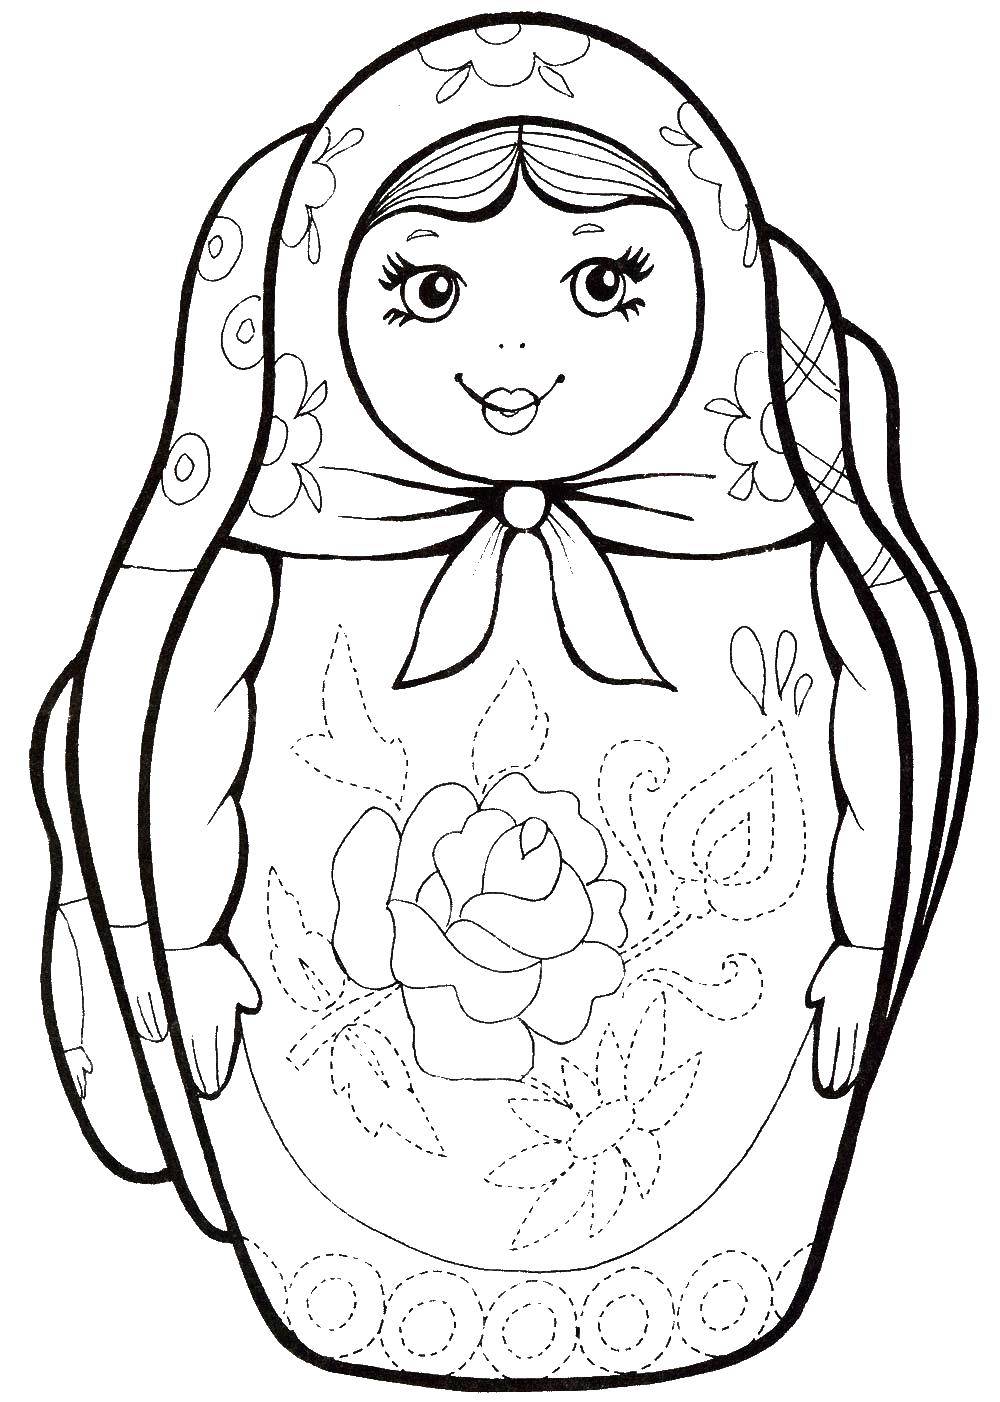 Coloring Fix the patterns on the dolls. Category fix on the model. Tags:  Matryoshka.